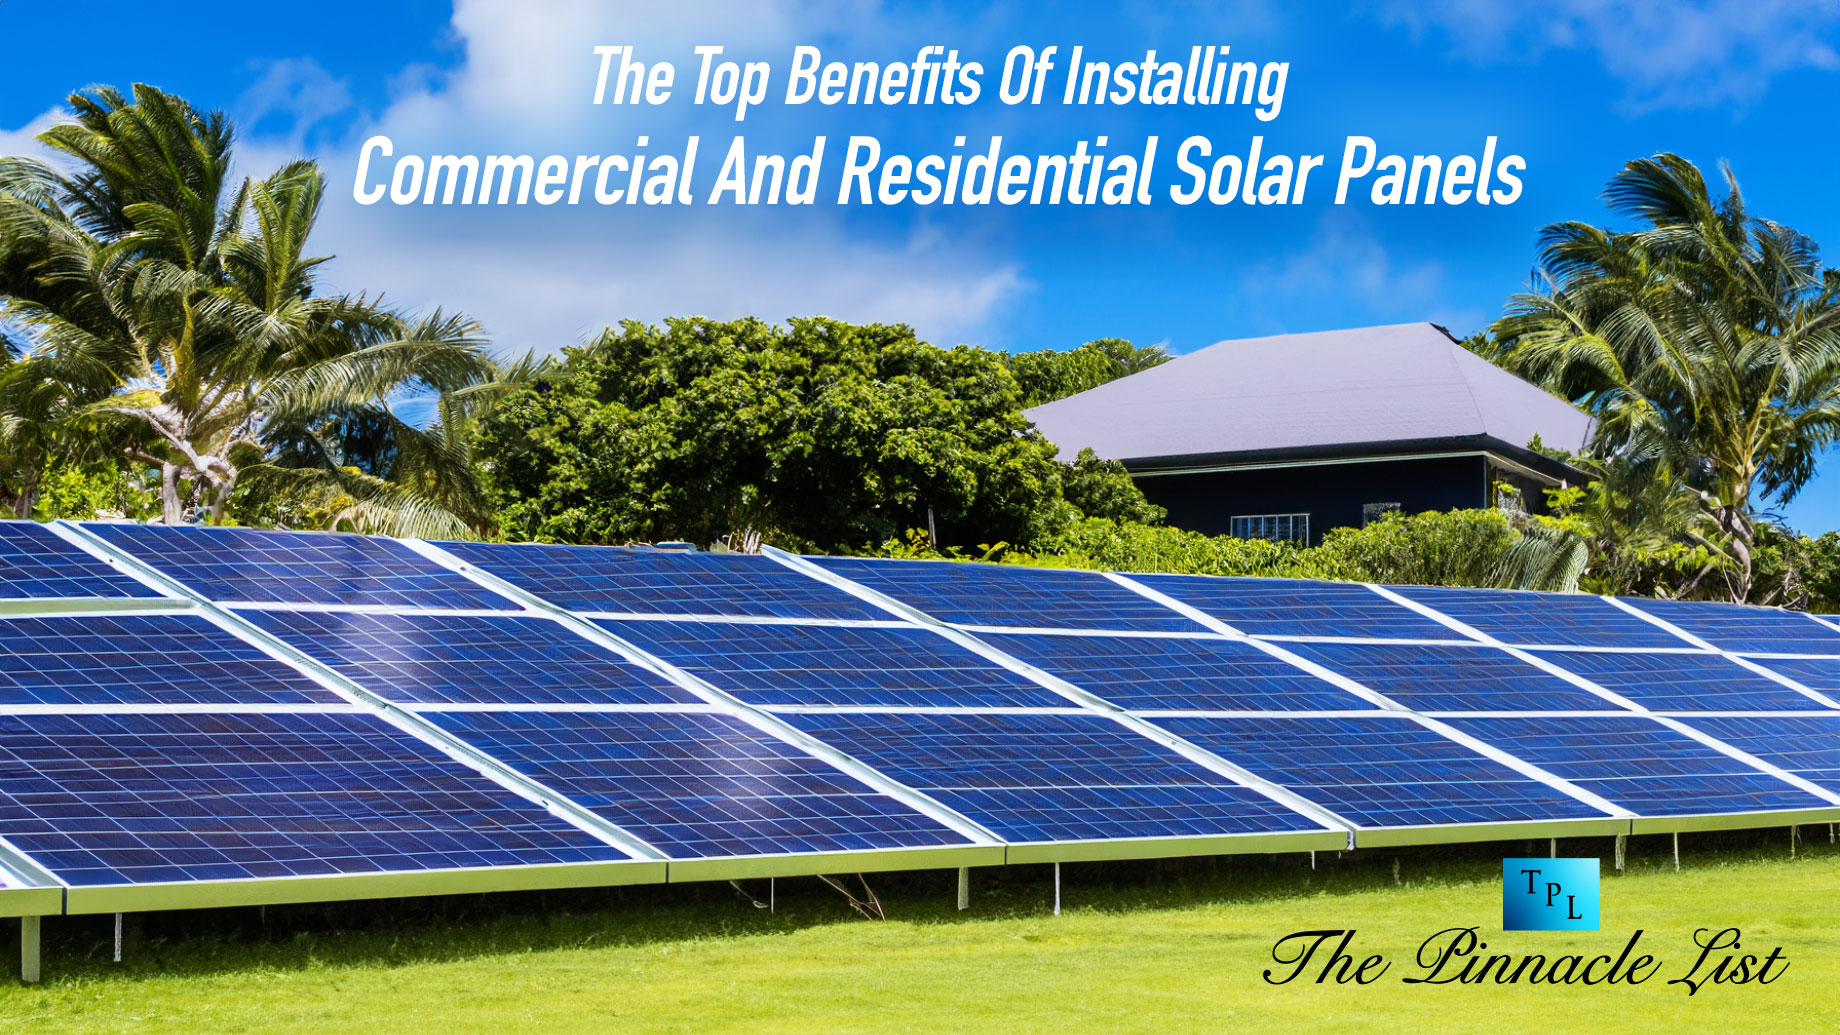 The Top Benefits Of Installing Commercial And Residential Solar Panels